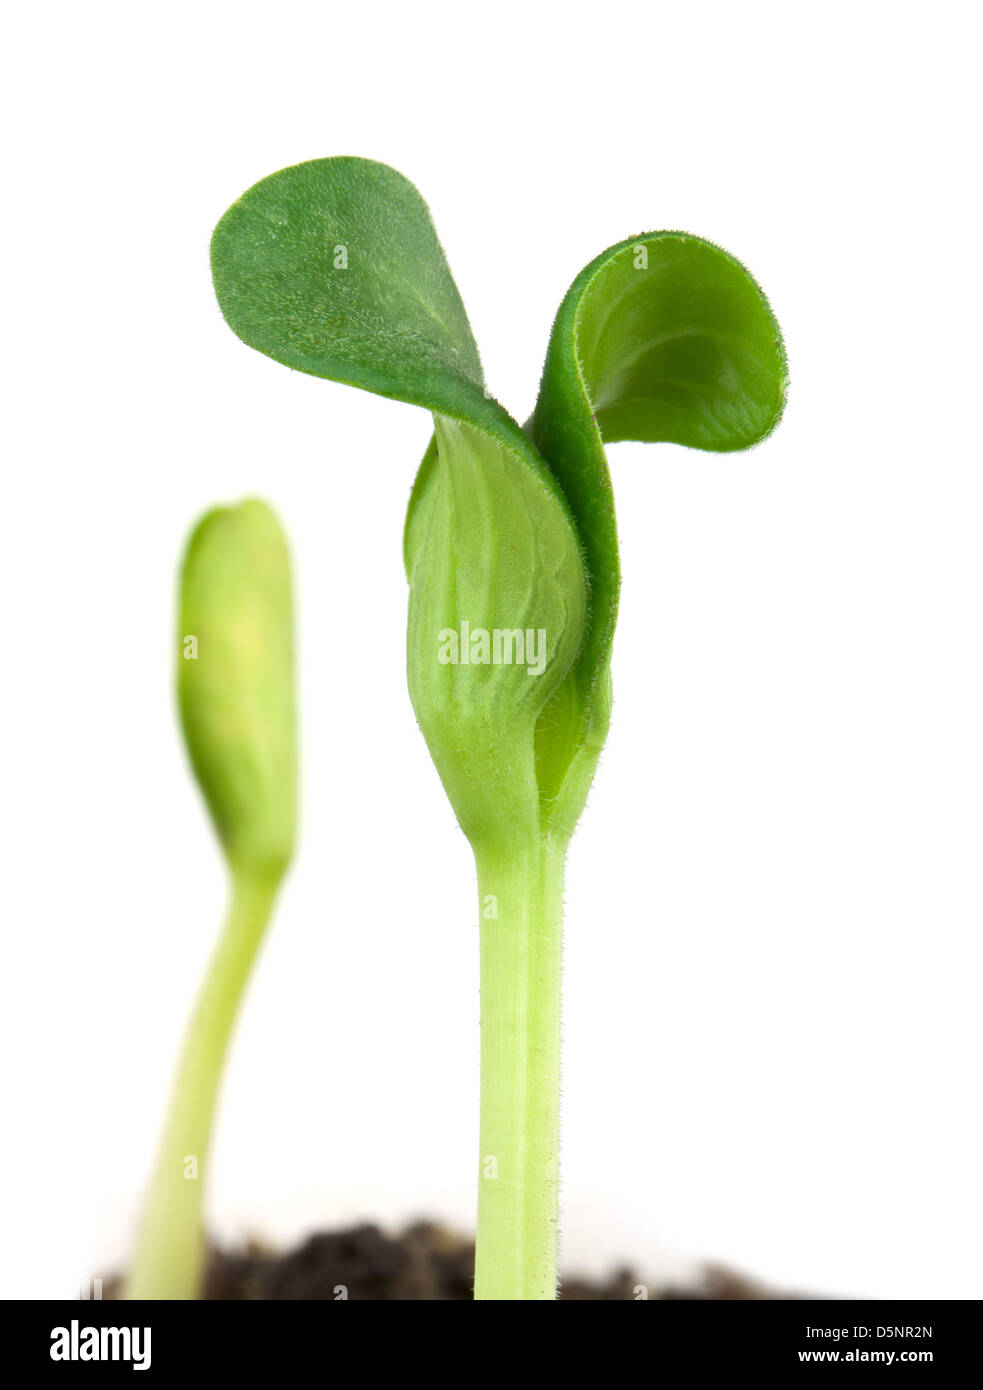 Small pumpkin seedling isolated on white background Stock Photo